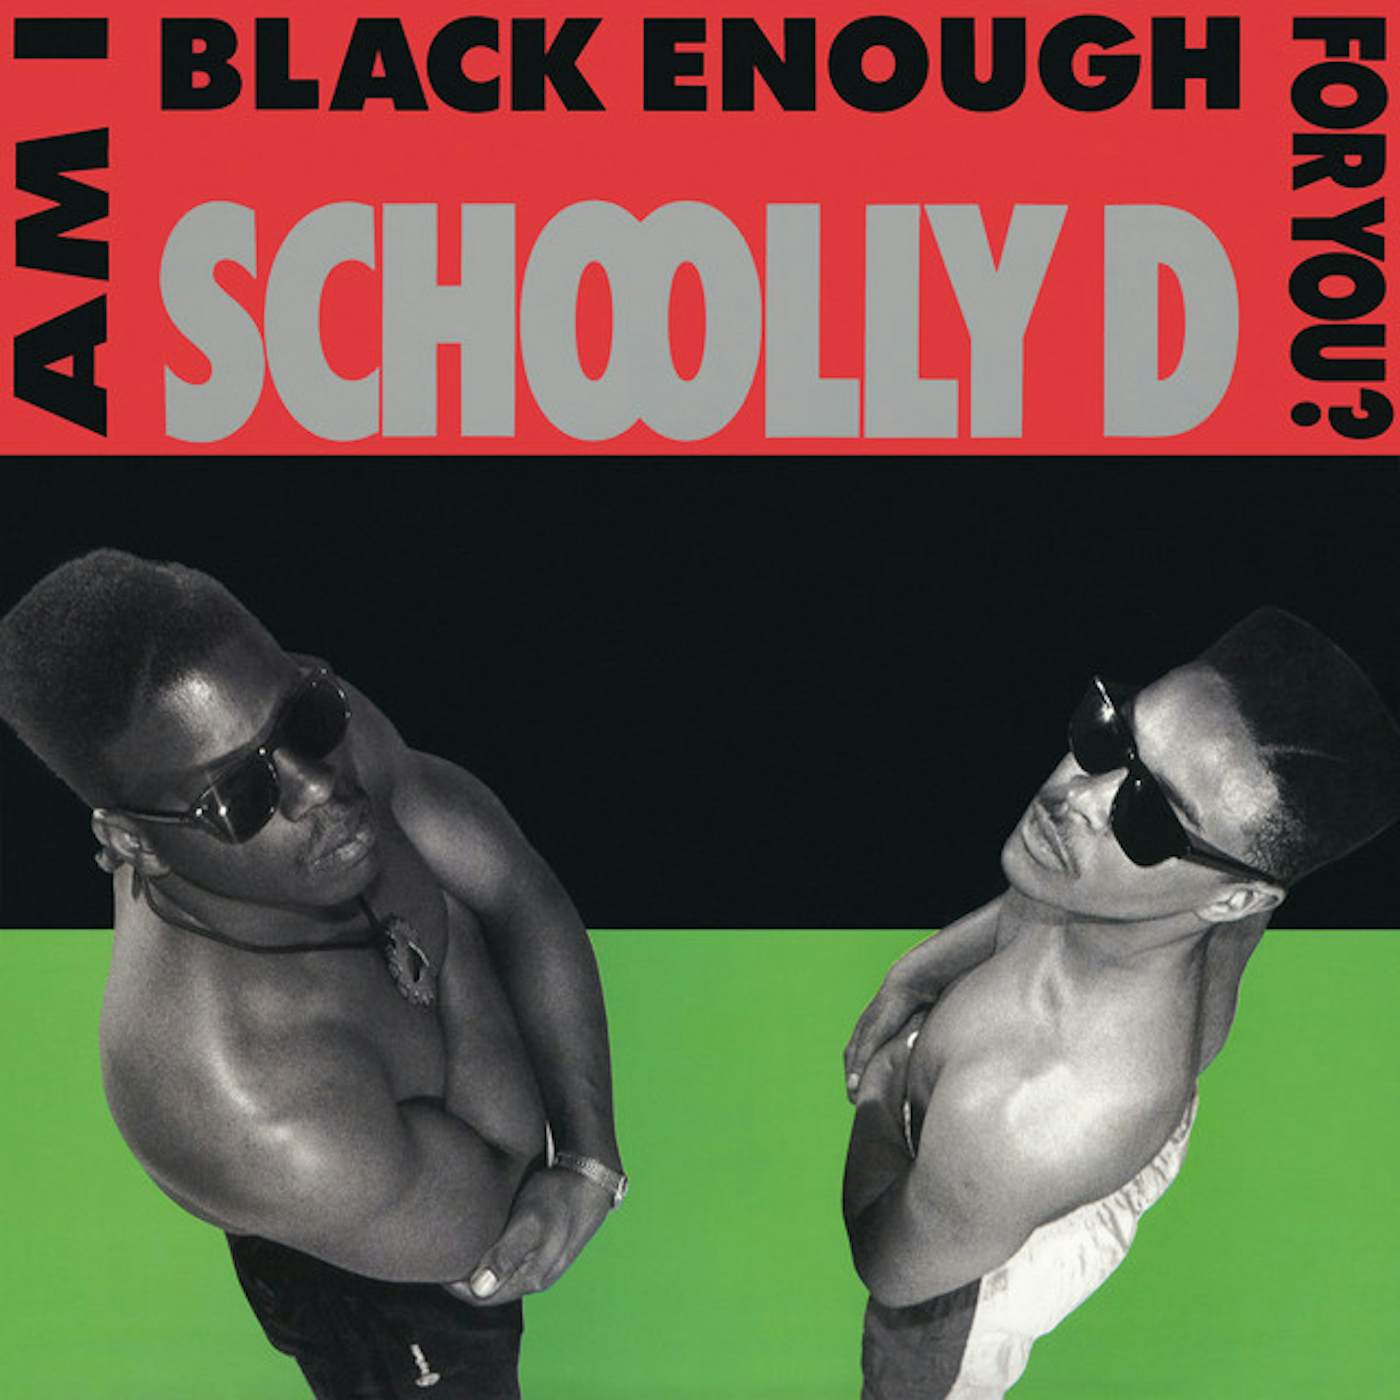 Schoolly D AM I BLACK ENOUGH FOR YOU CD